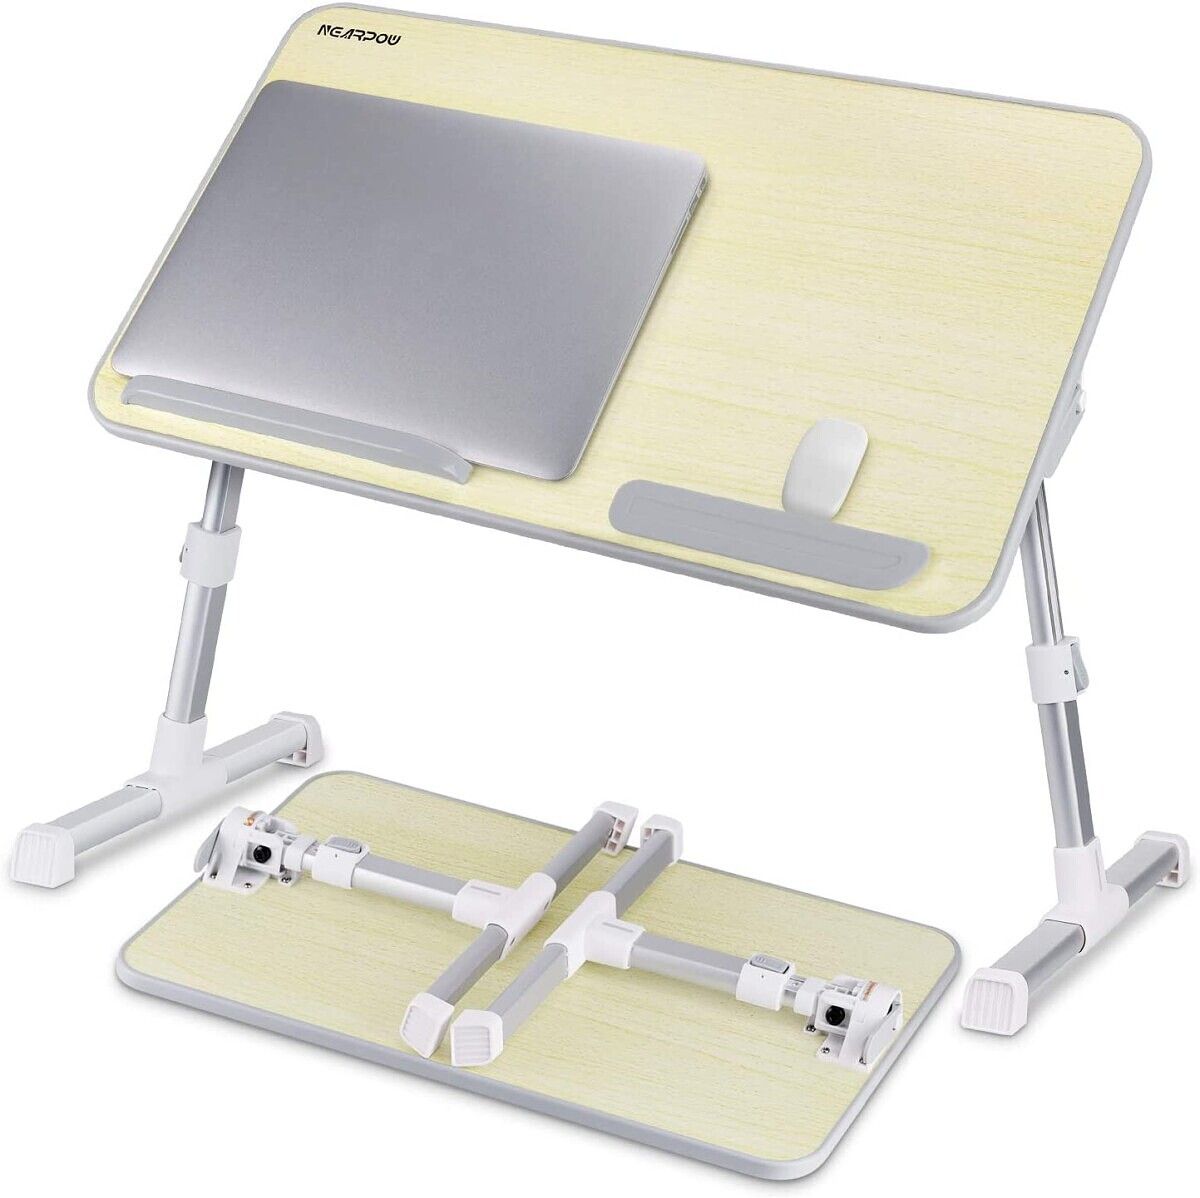 Lay down and feel better while getting some work done with an adjustible laptop tray table! Nearpow's offering has four heights and different angles available, and enough room for both your laptop and a mouse.